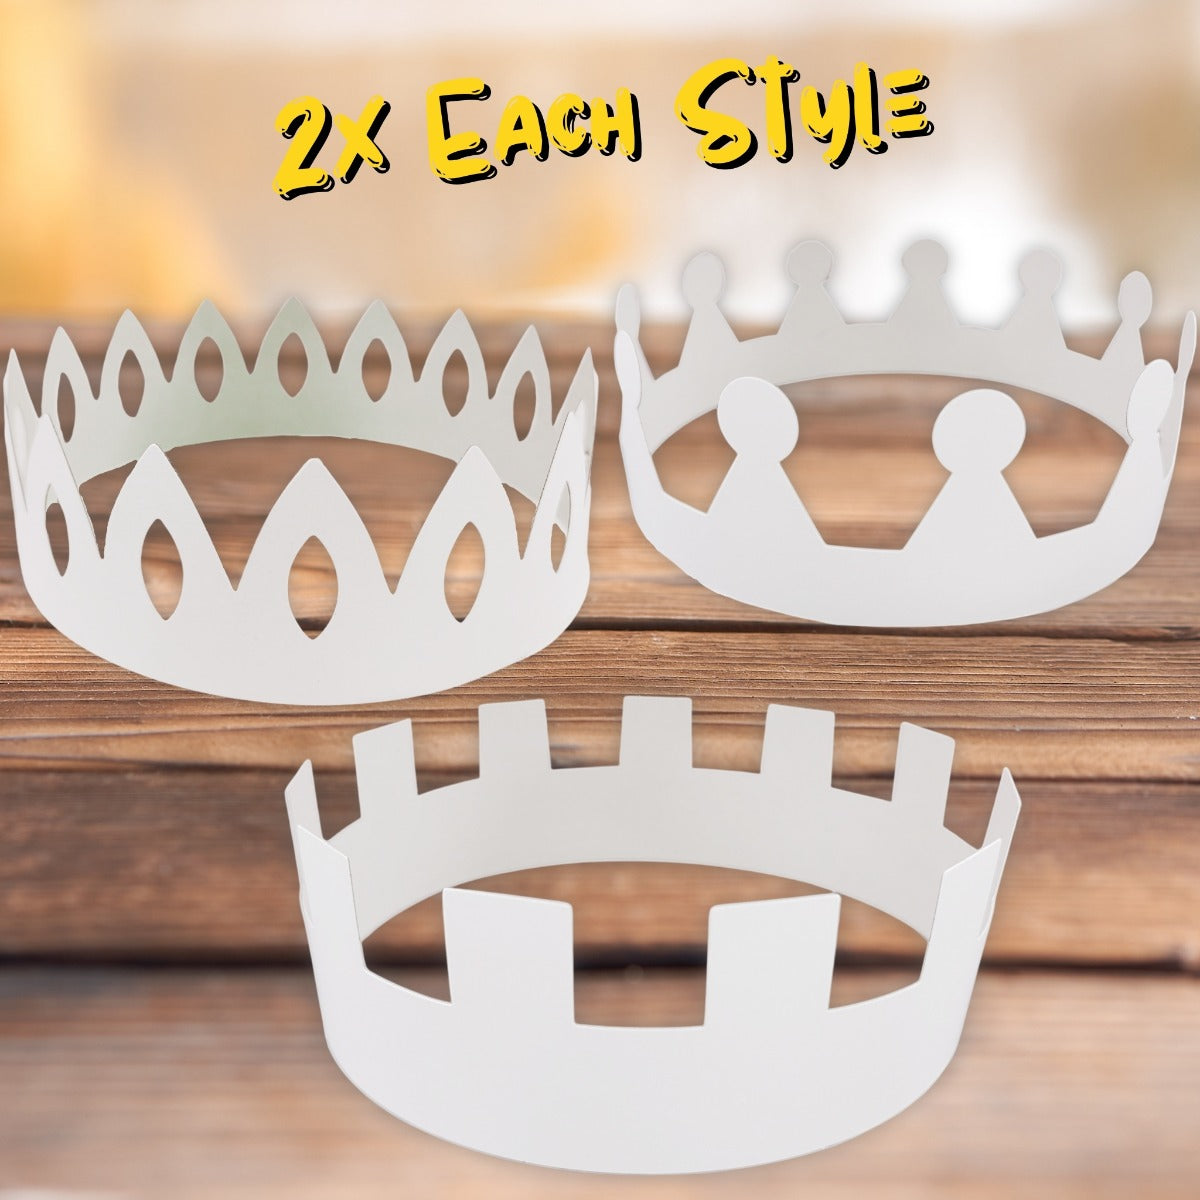 Make Your Own White Craft Crown Party Hats